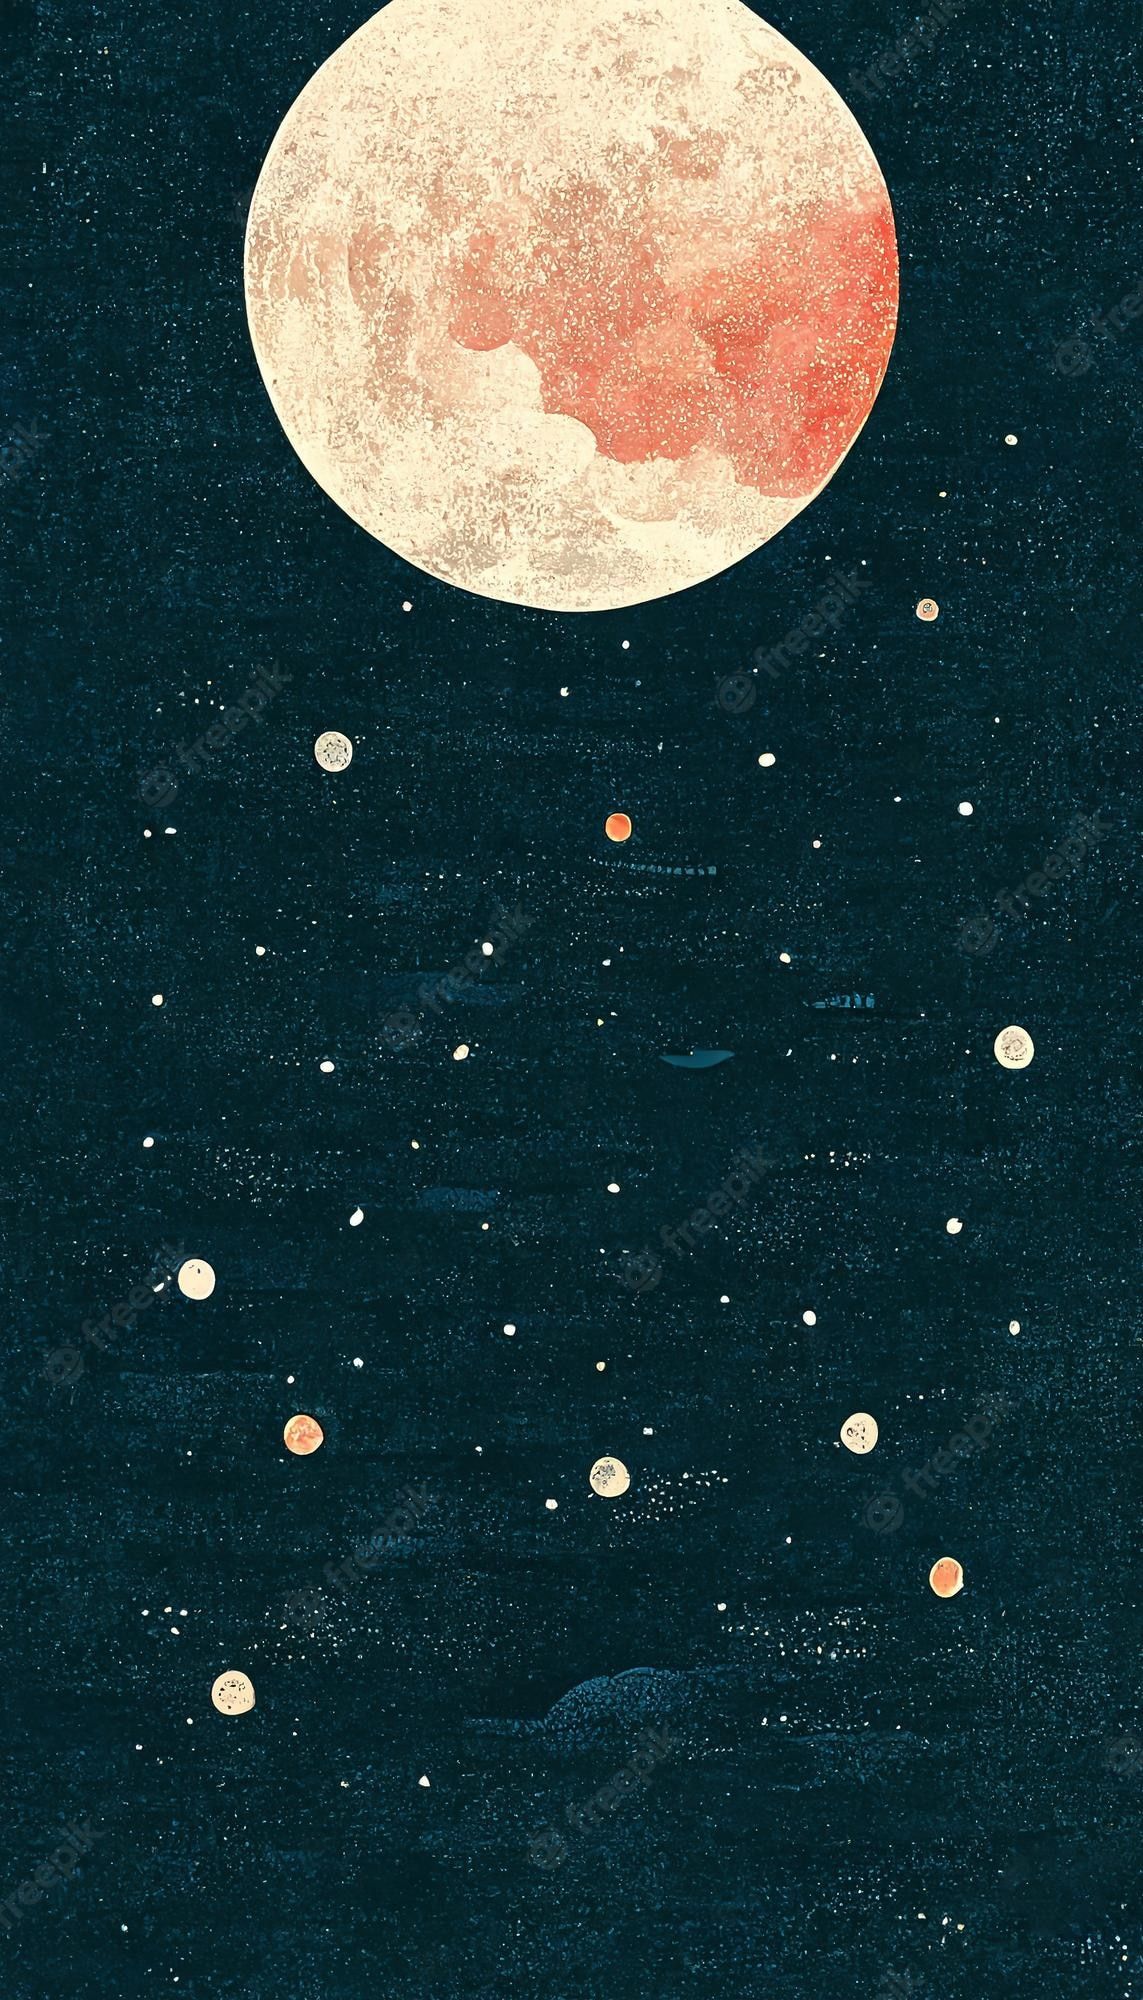 A painting of the moon and stars - Moon phases